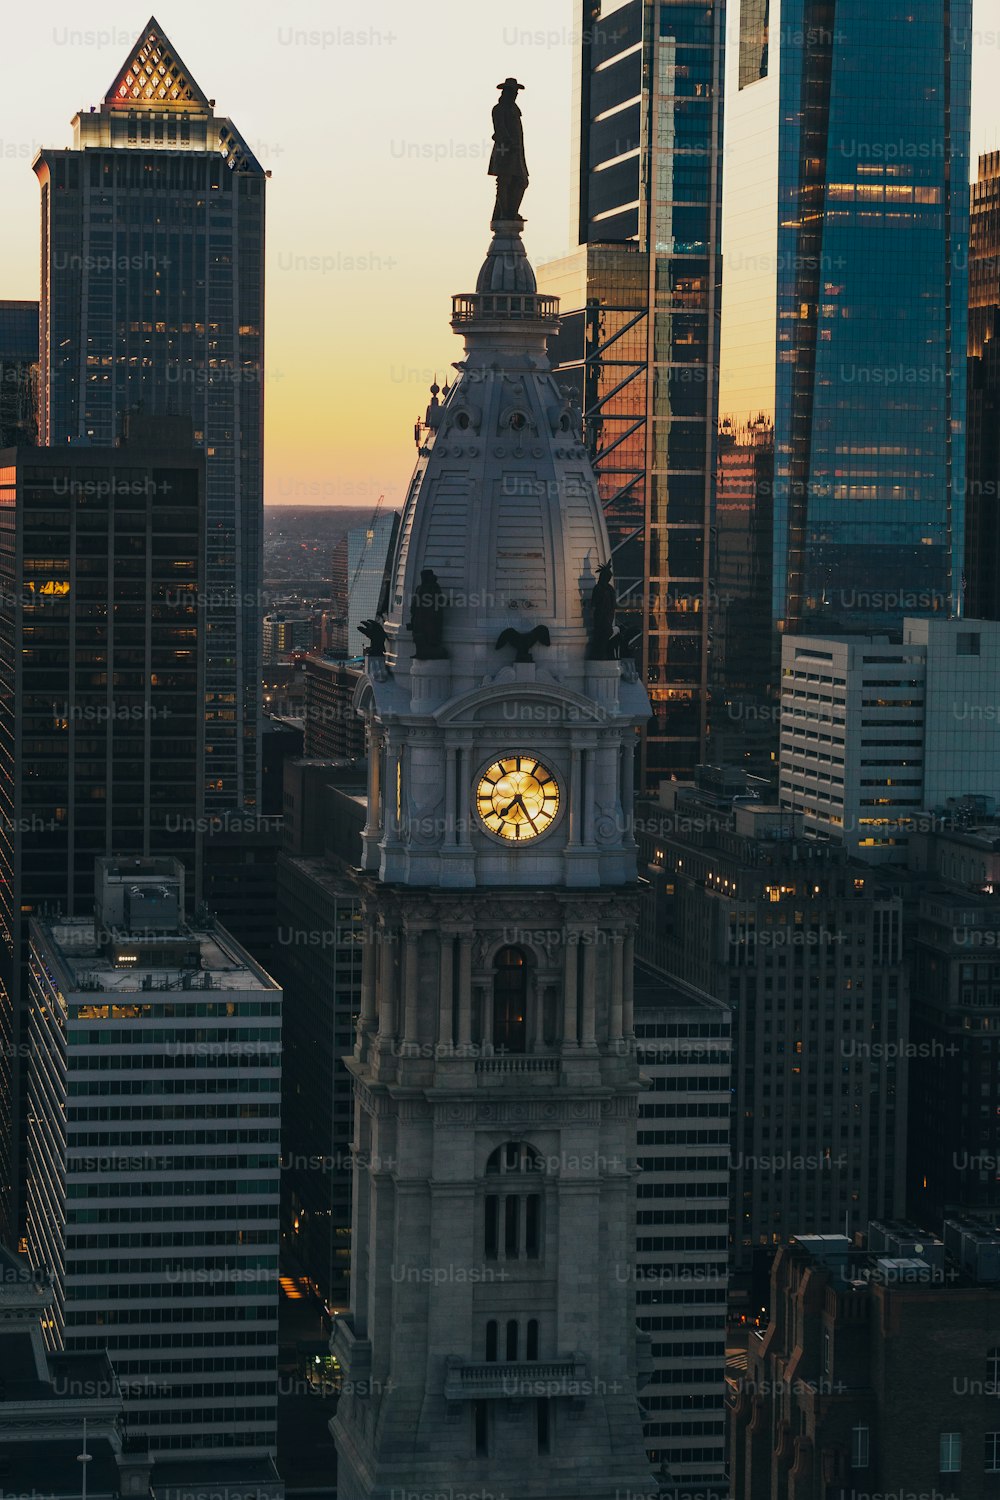 a clock on a tower in a city